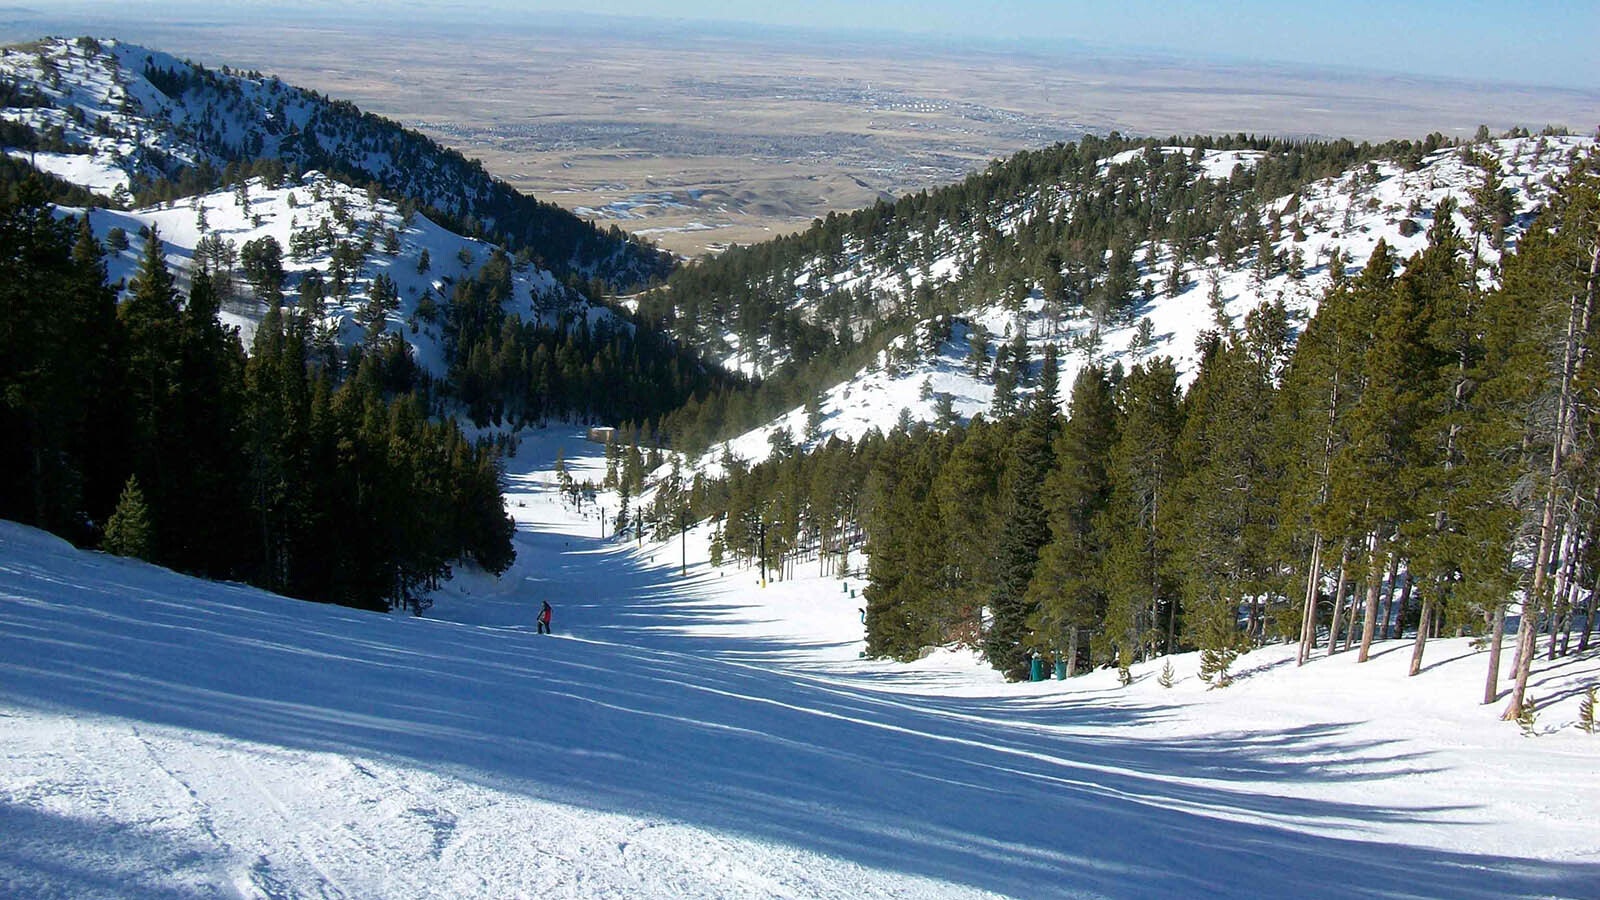 View down a run at Hogadon Basin Ski Area with the city of Casper visible in the distance.